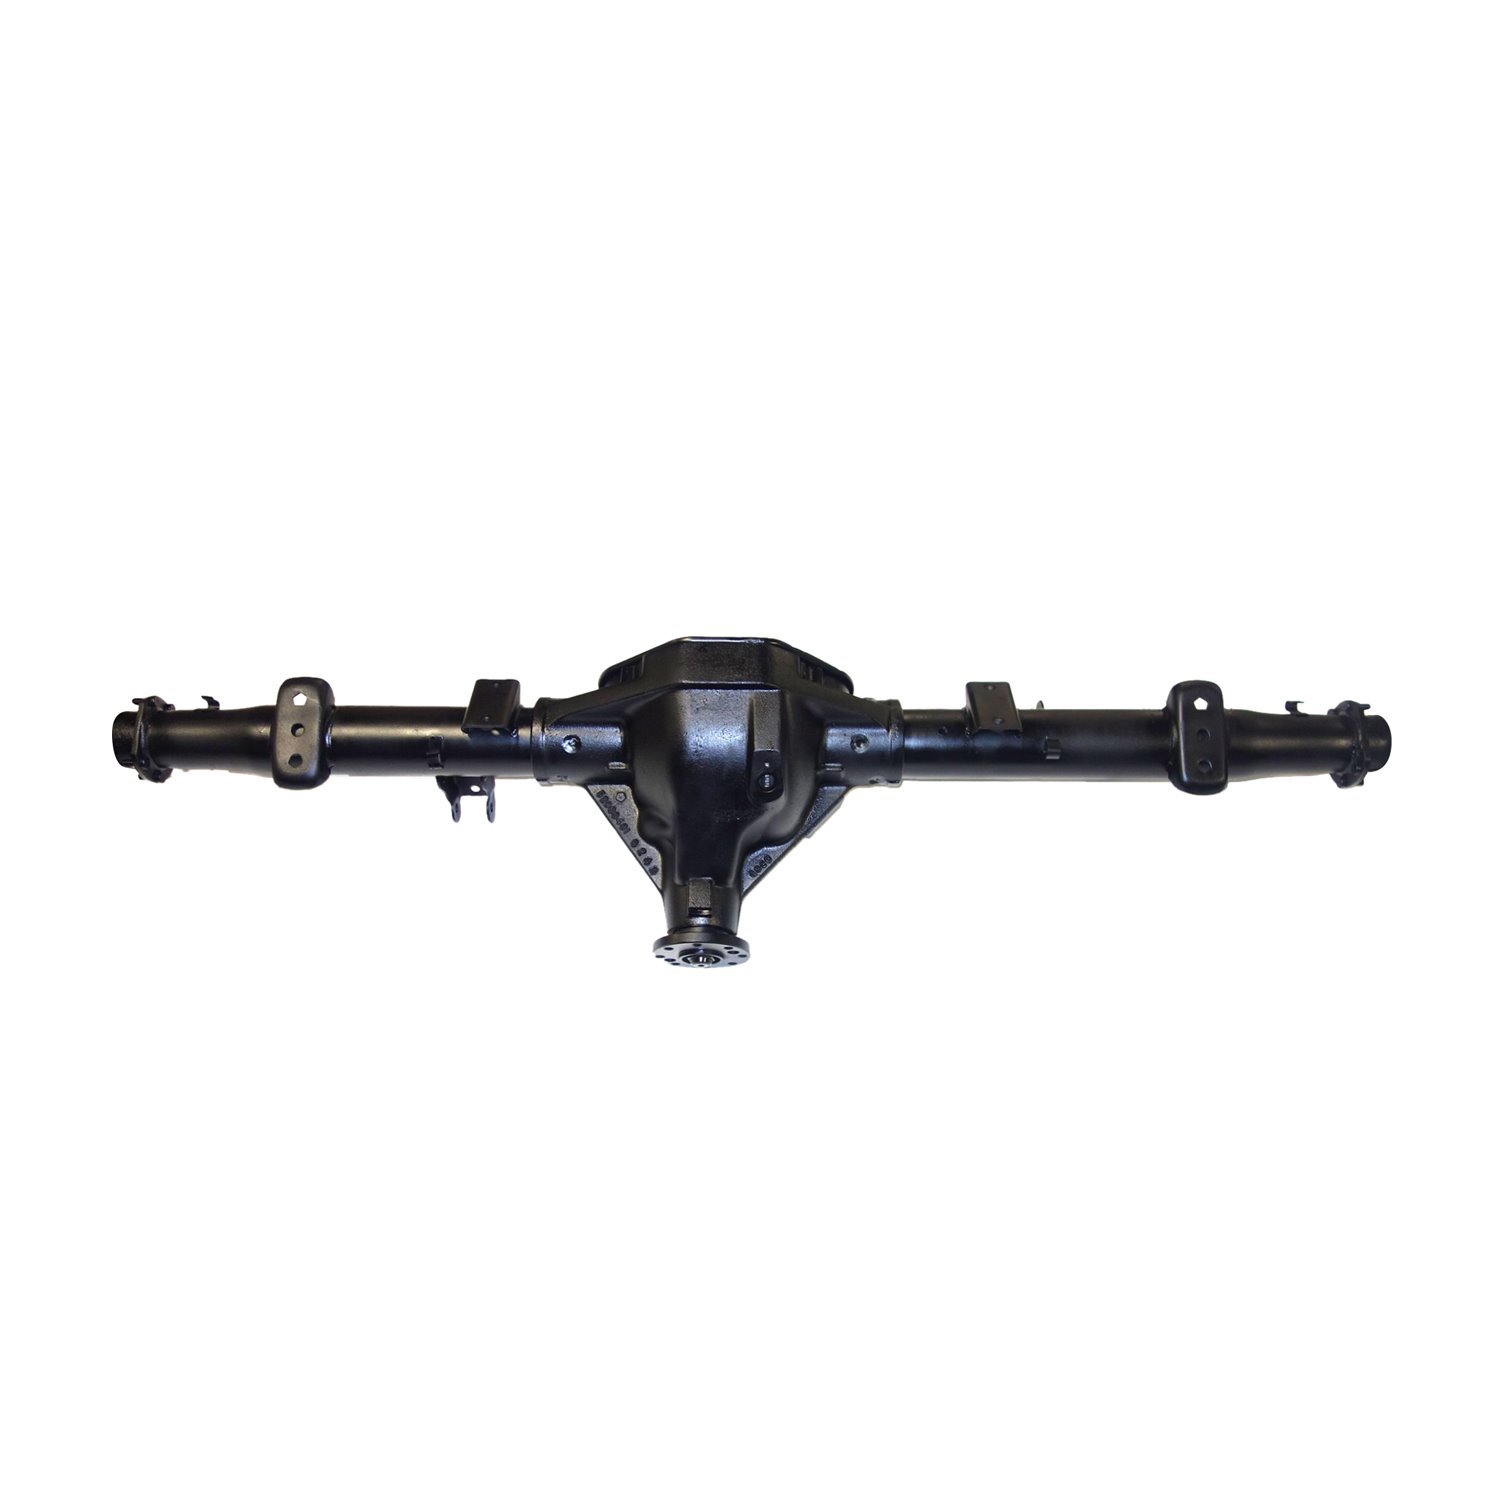 Remanufactured Axle Assy for Chy 9.25" 04-05 Dodge Durango 3.92 , 4x4 w/ Traction Control